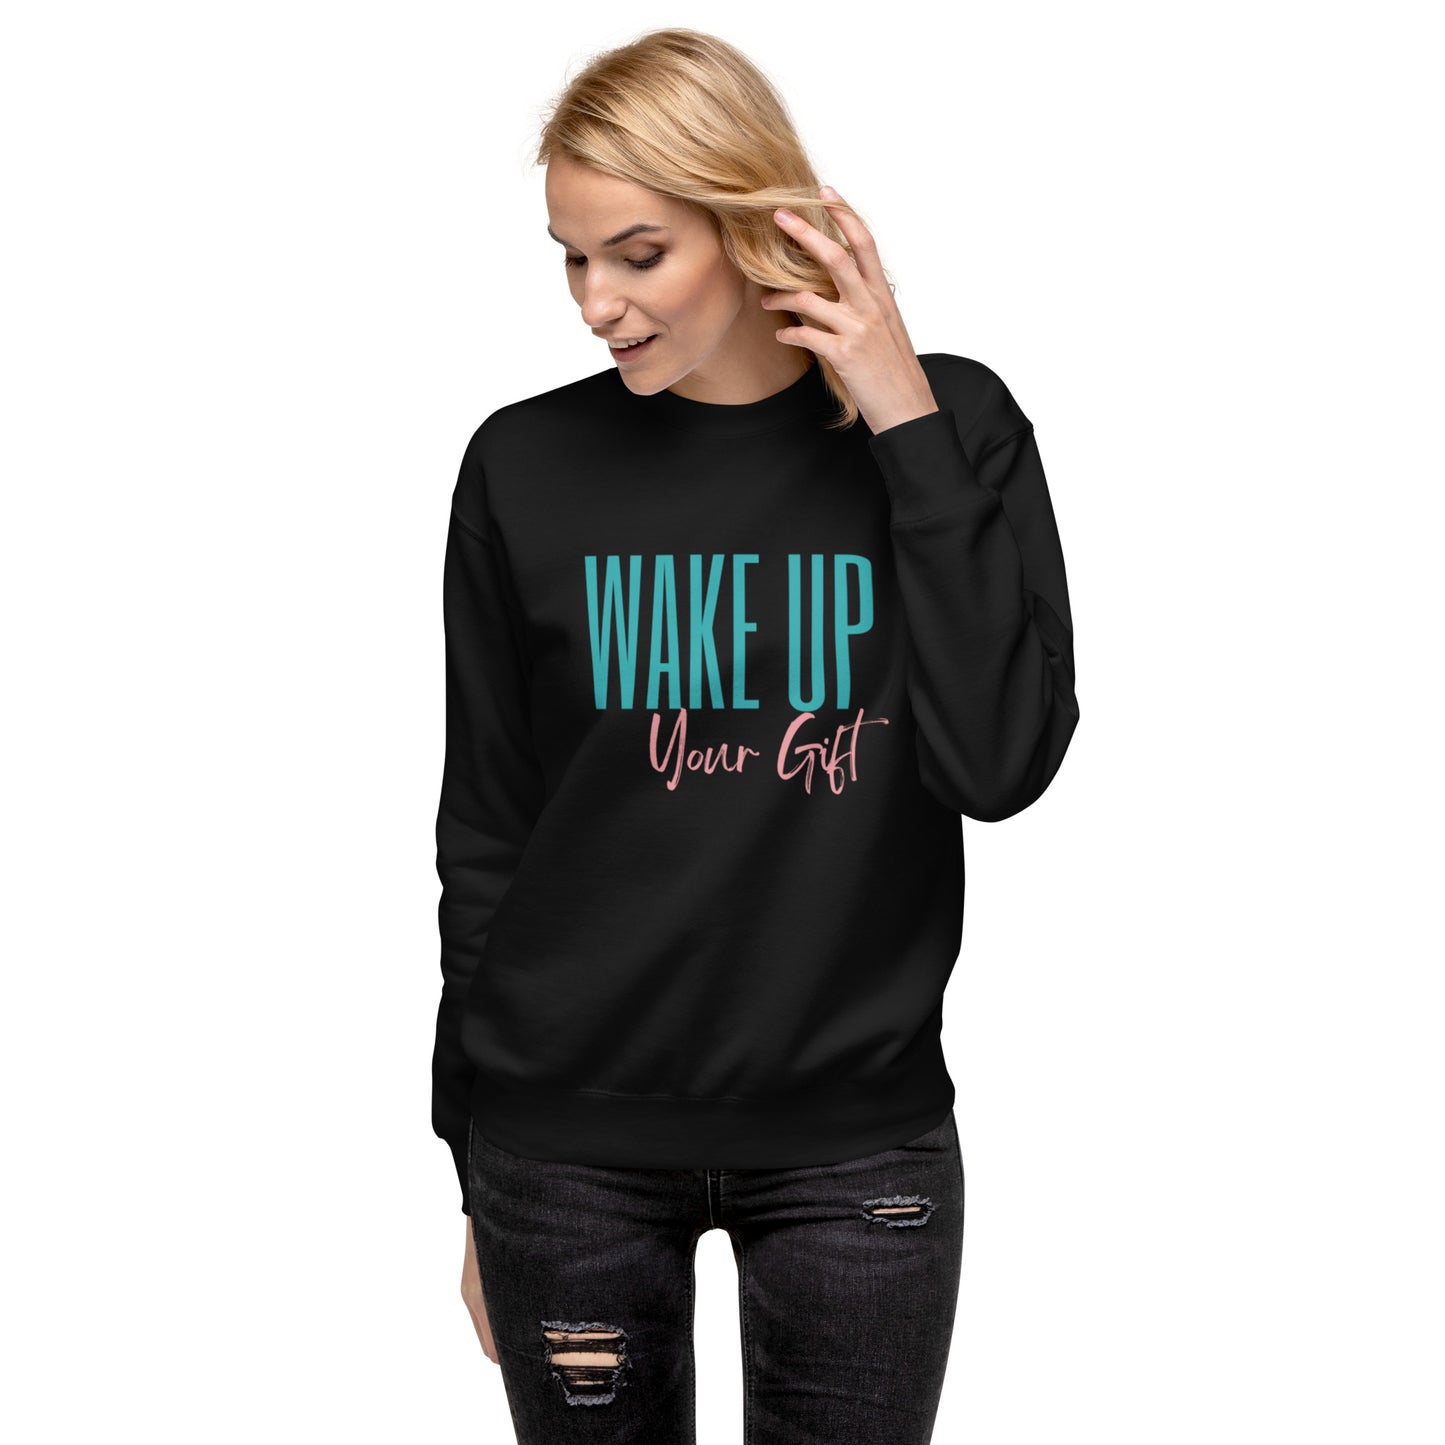 Wake Up Your Gift Teal and Pink Premium Sweatshirt